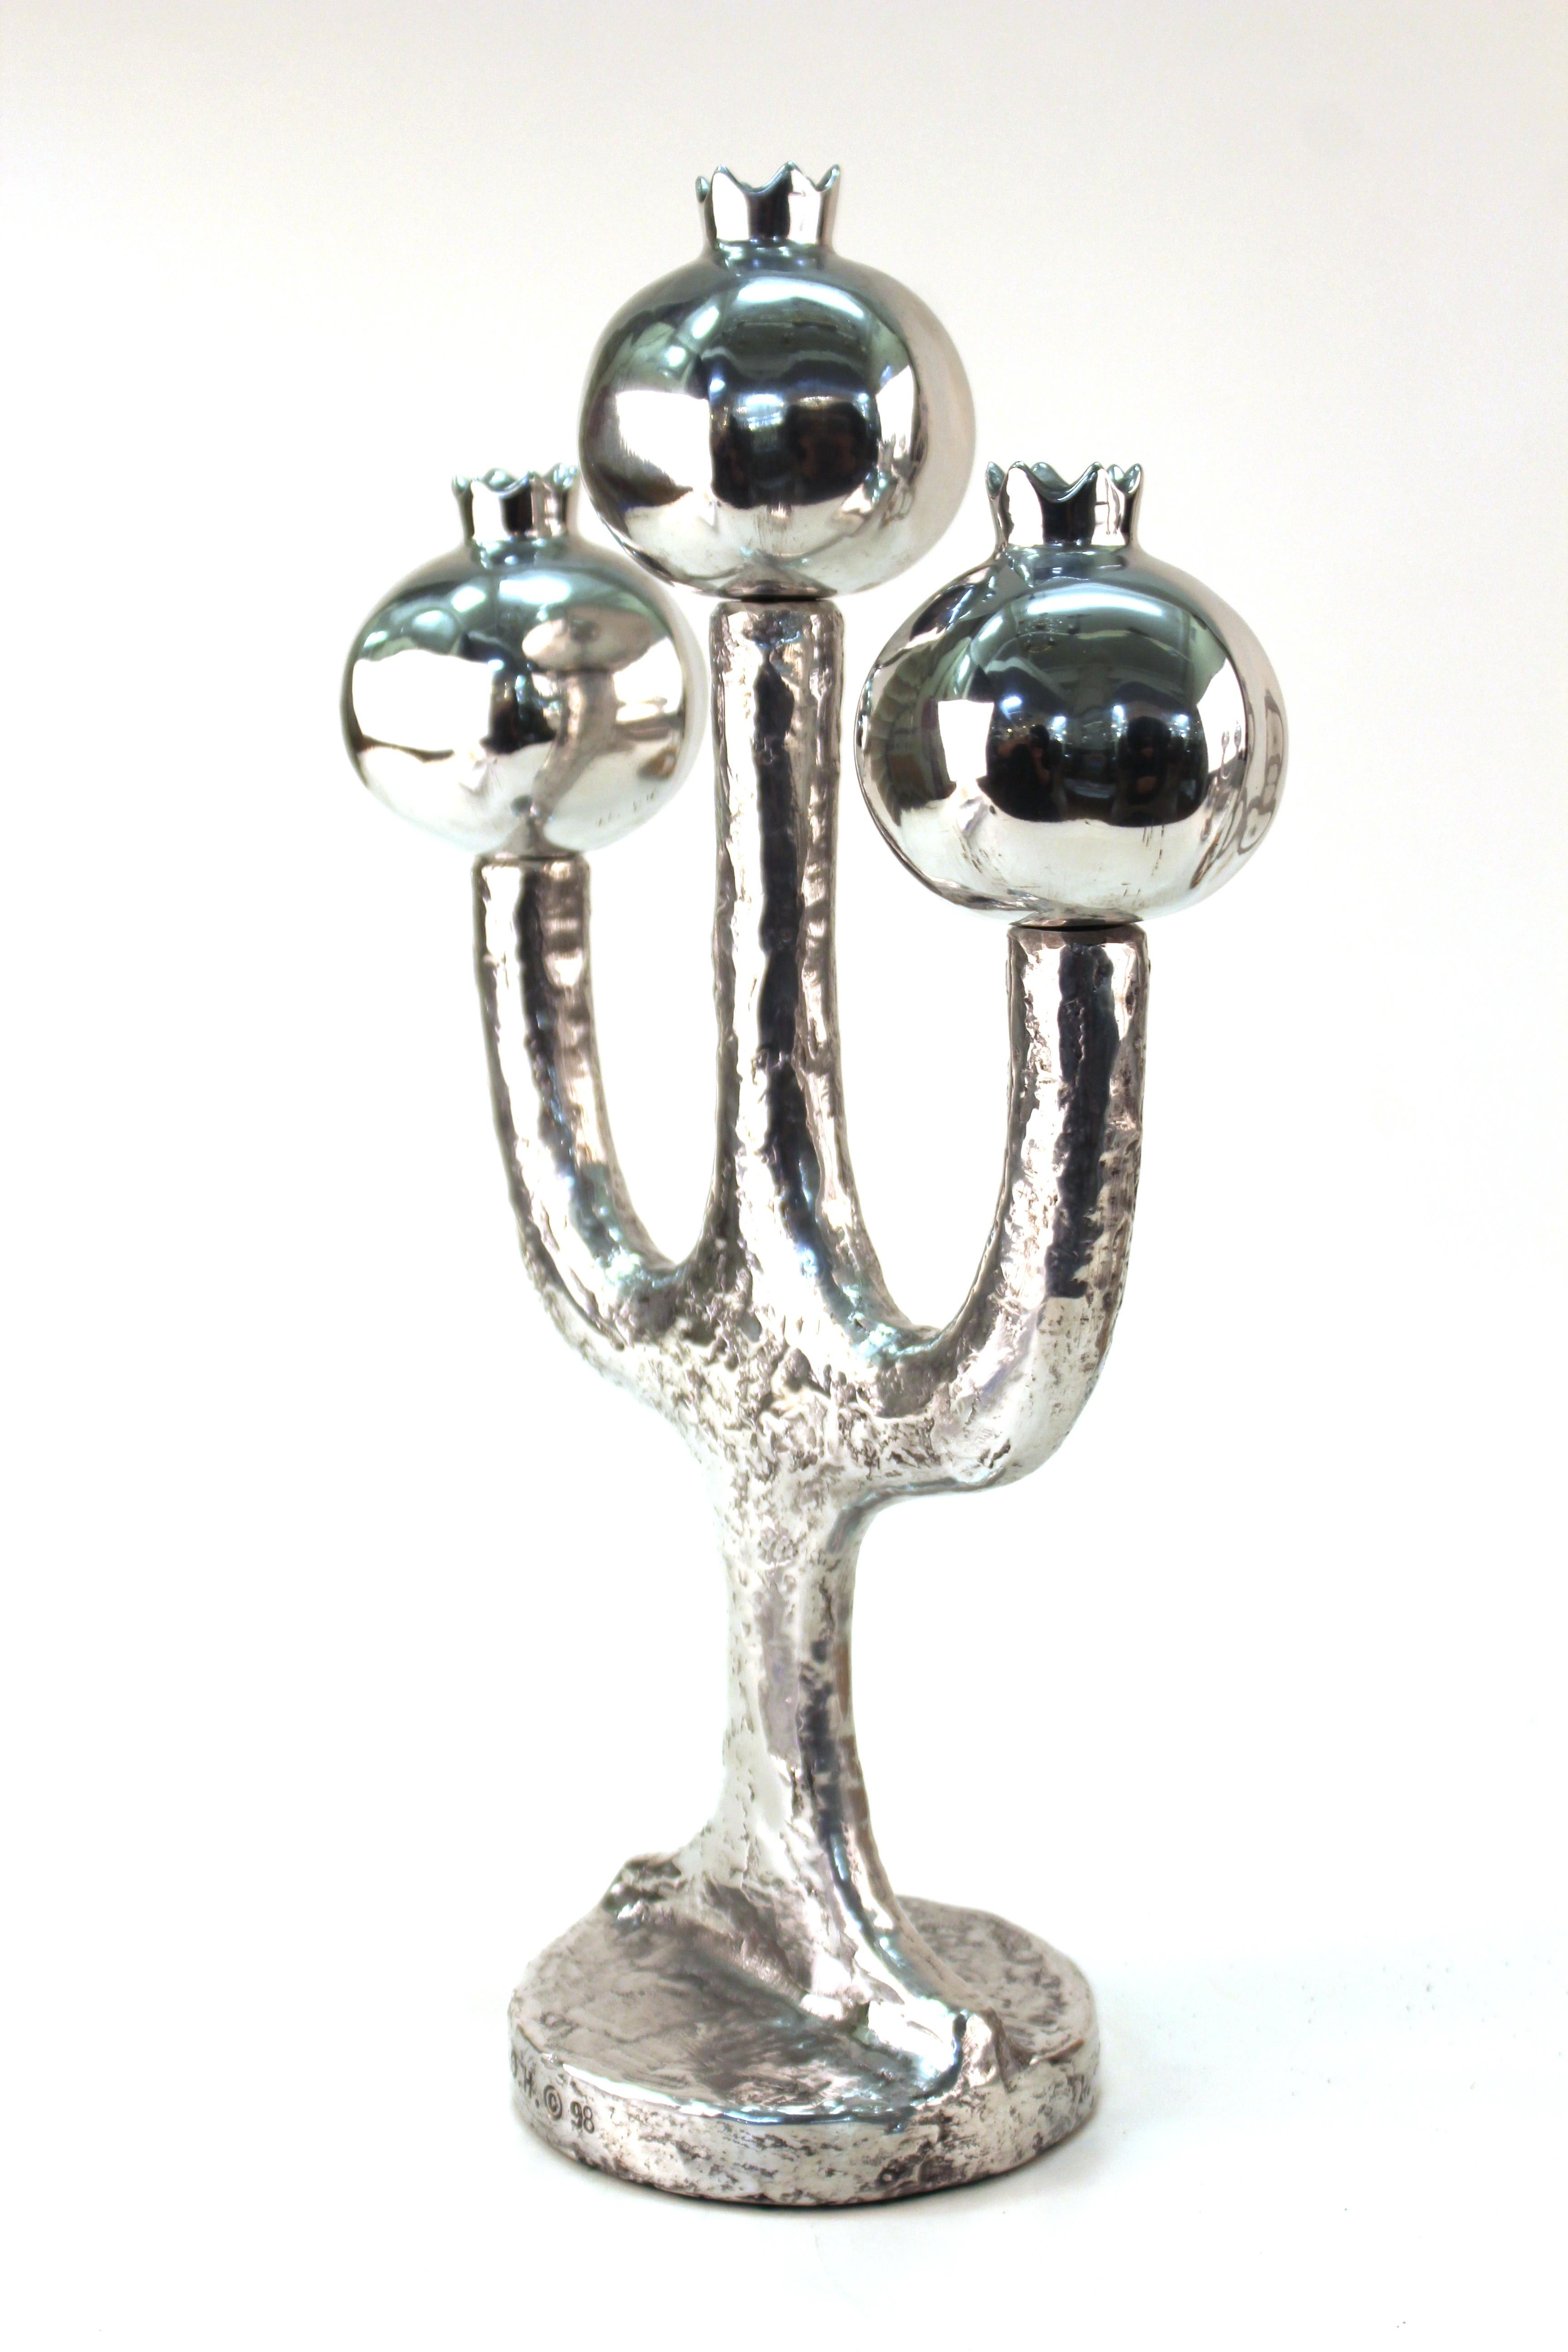 Modern cast aluminium candelabra created by Oded Halahmy, titled 'Three Lights', created in 1998. Marked by the artist and dated on the base. In great vintage condition.